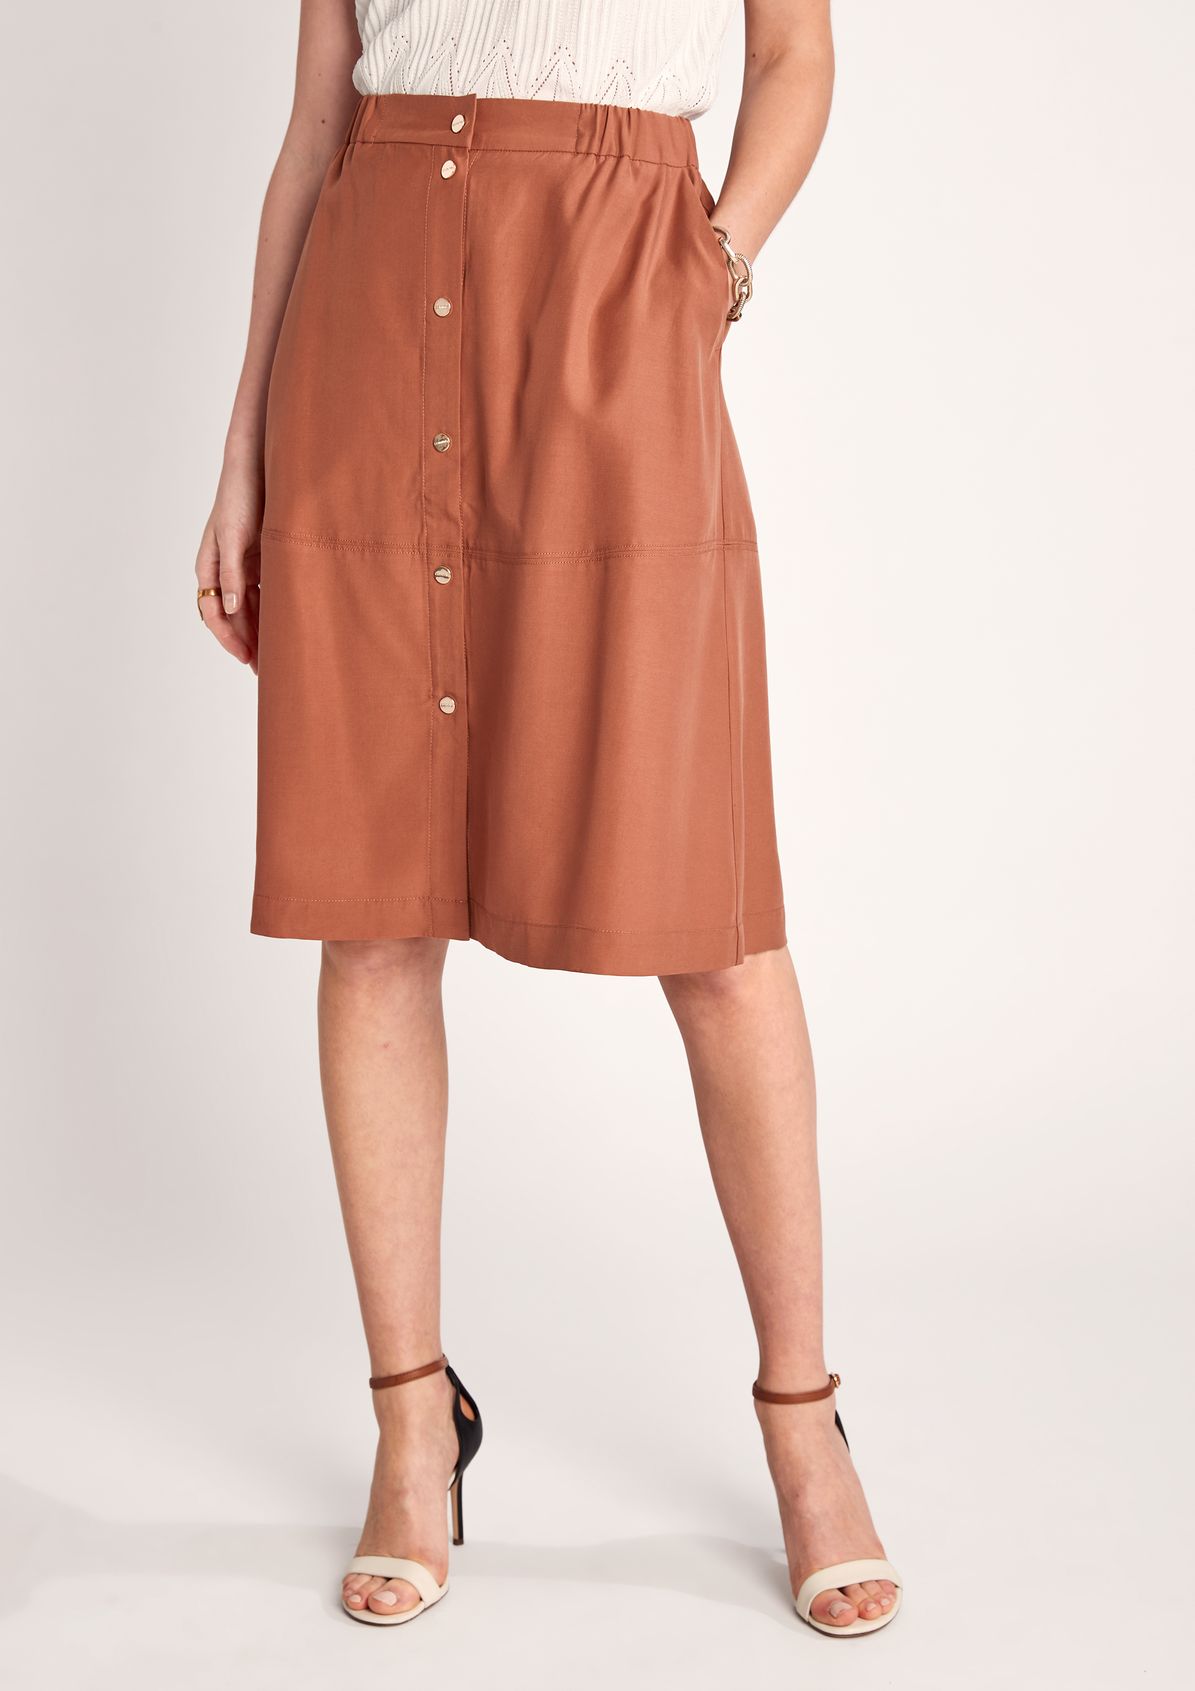 Lyocell skirt with a decorative button placket from comma